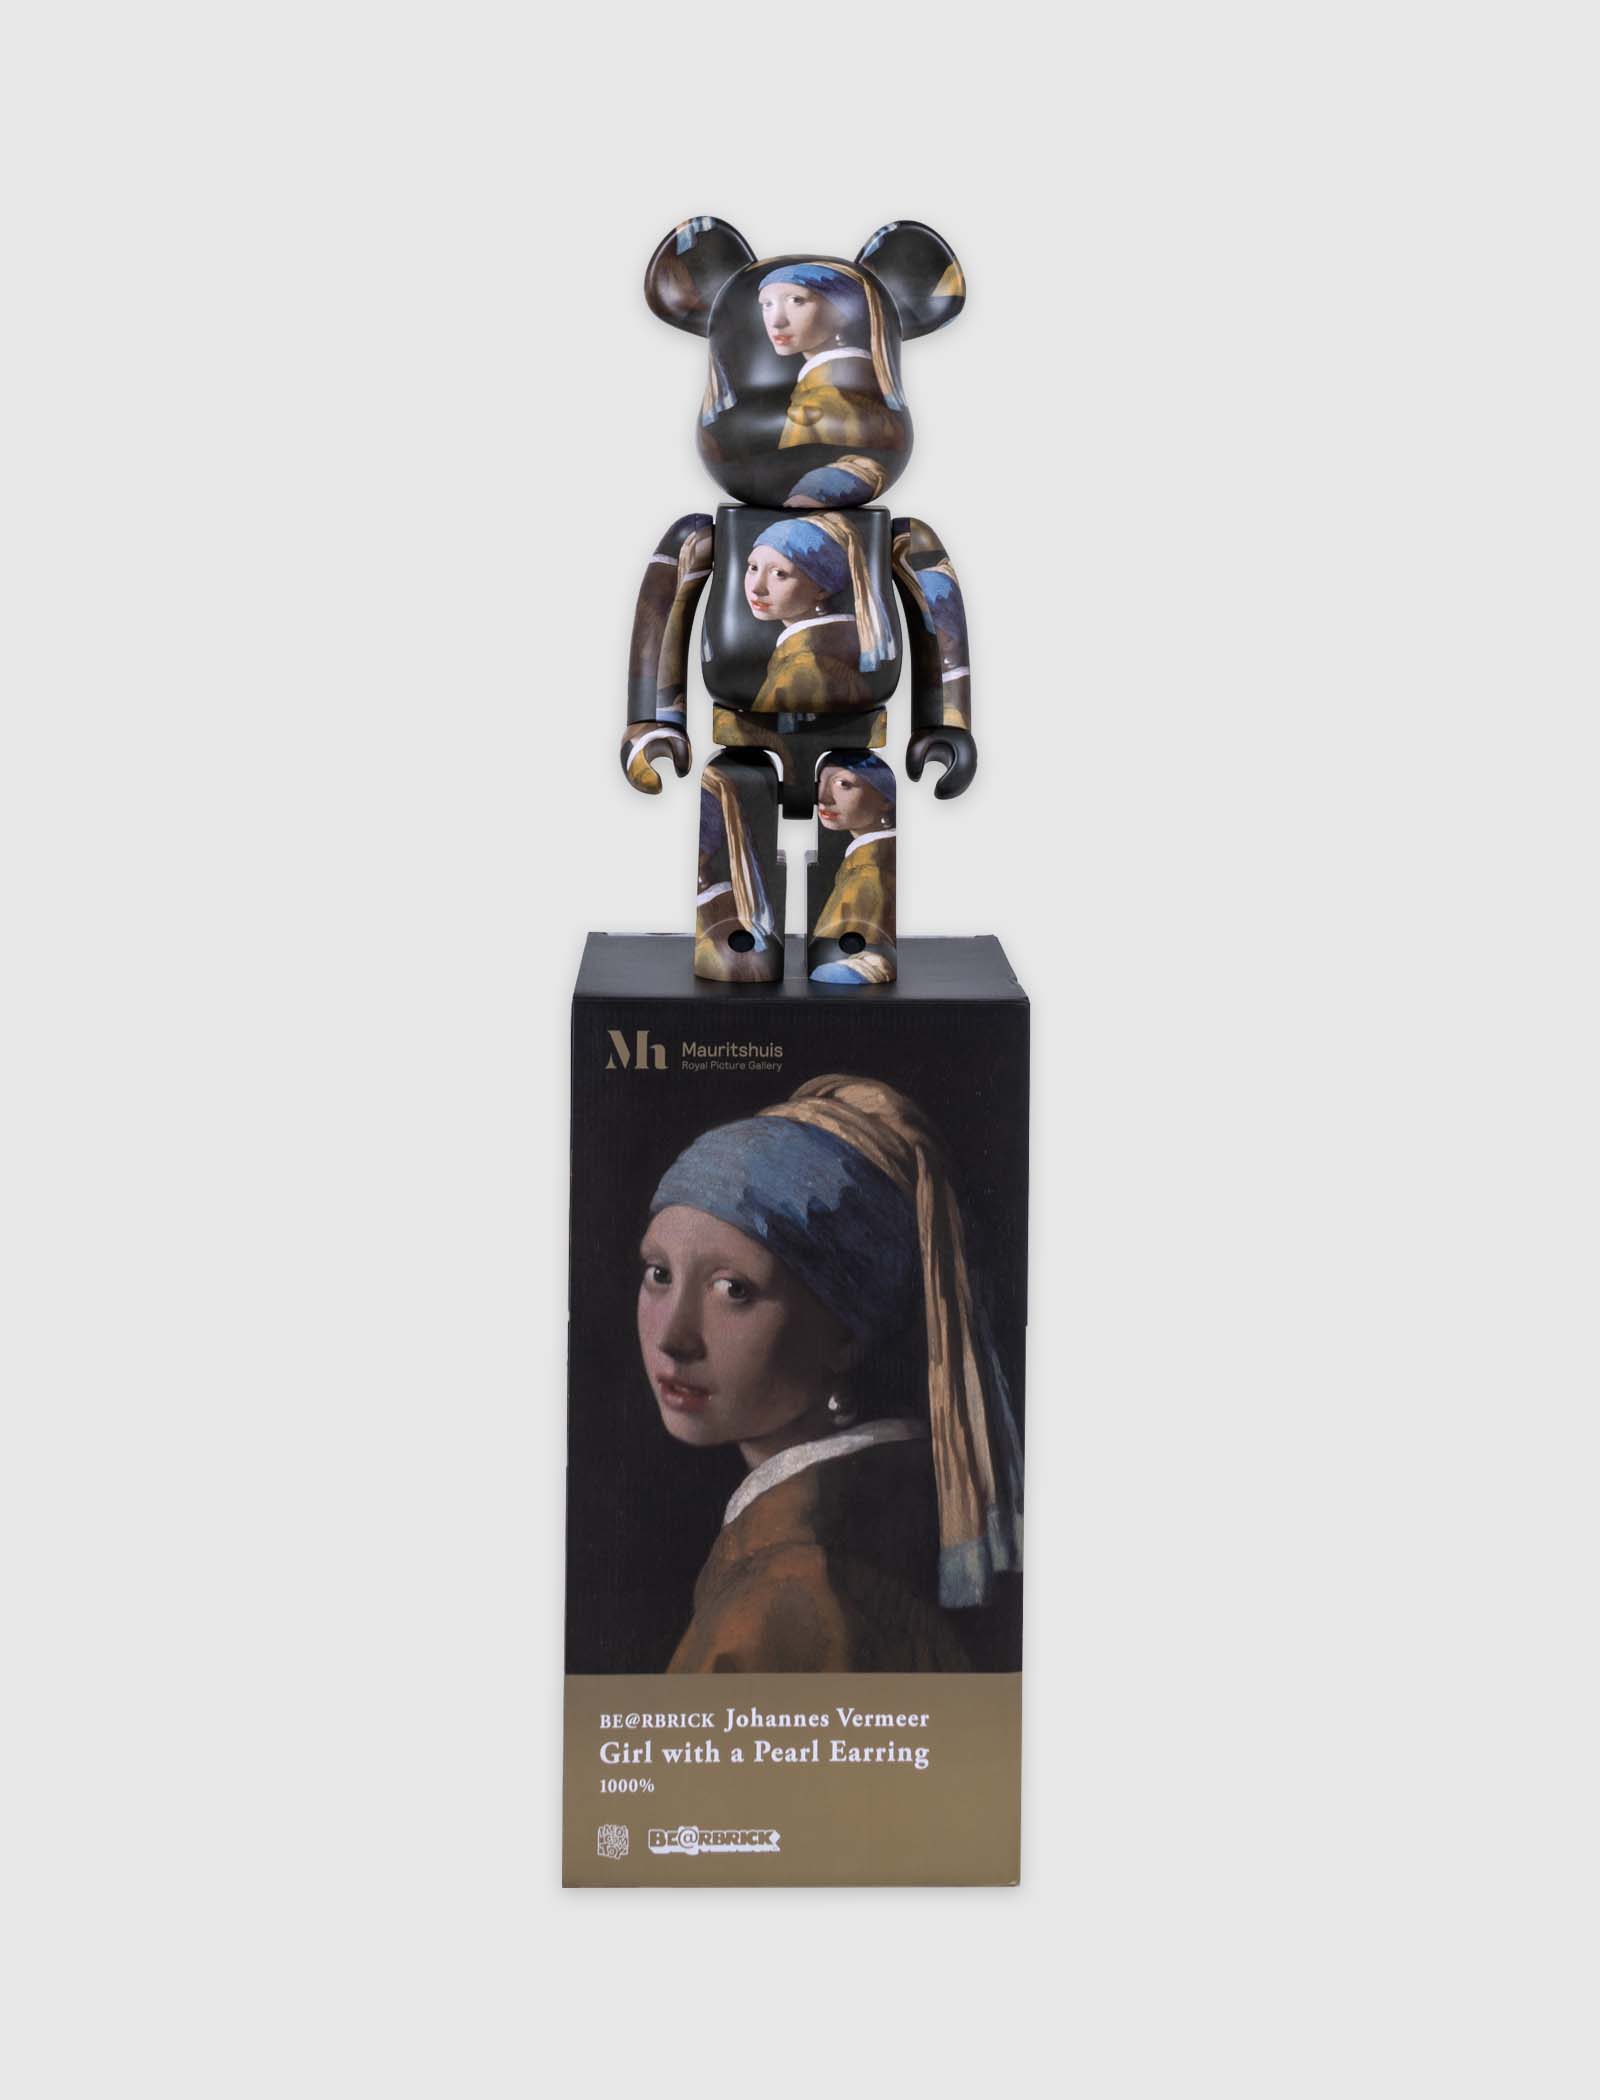 JOHANNES VERMEER (GIRL WITH A PEARL EARRING) 1000% BE@RBRICK